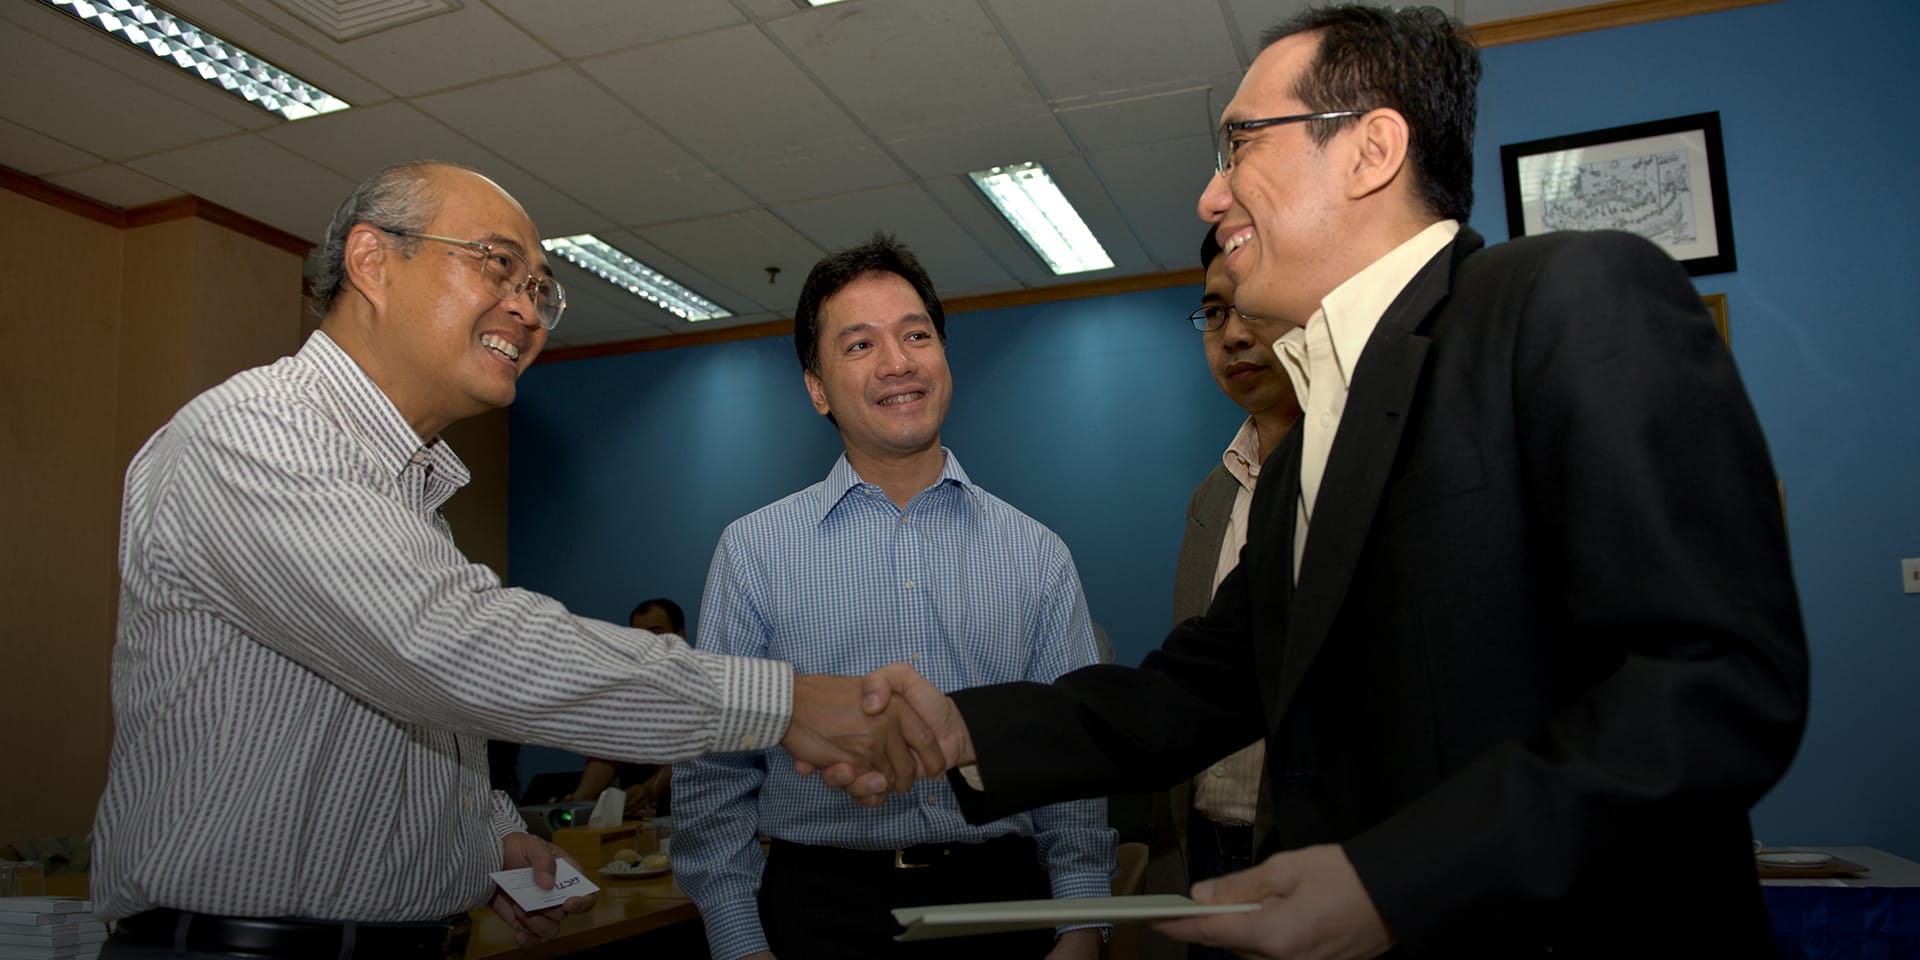 Men shaking hands and smiling